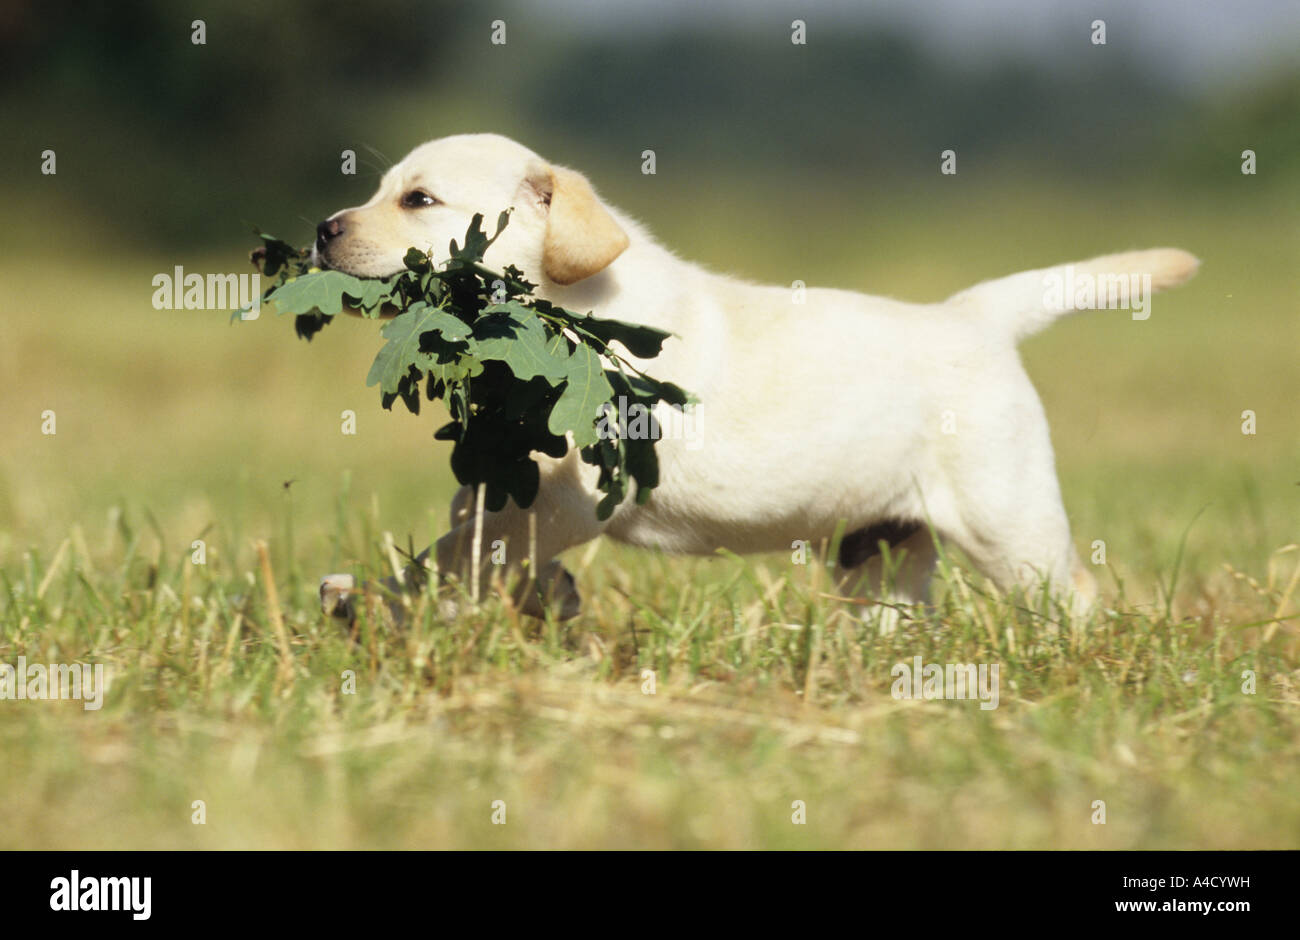 Labrador Retriever (Canis lupus familiaris). Puppy with an oak twig in its mouth. Stock Photo